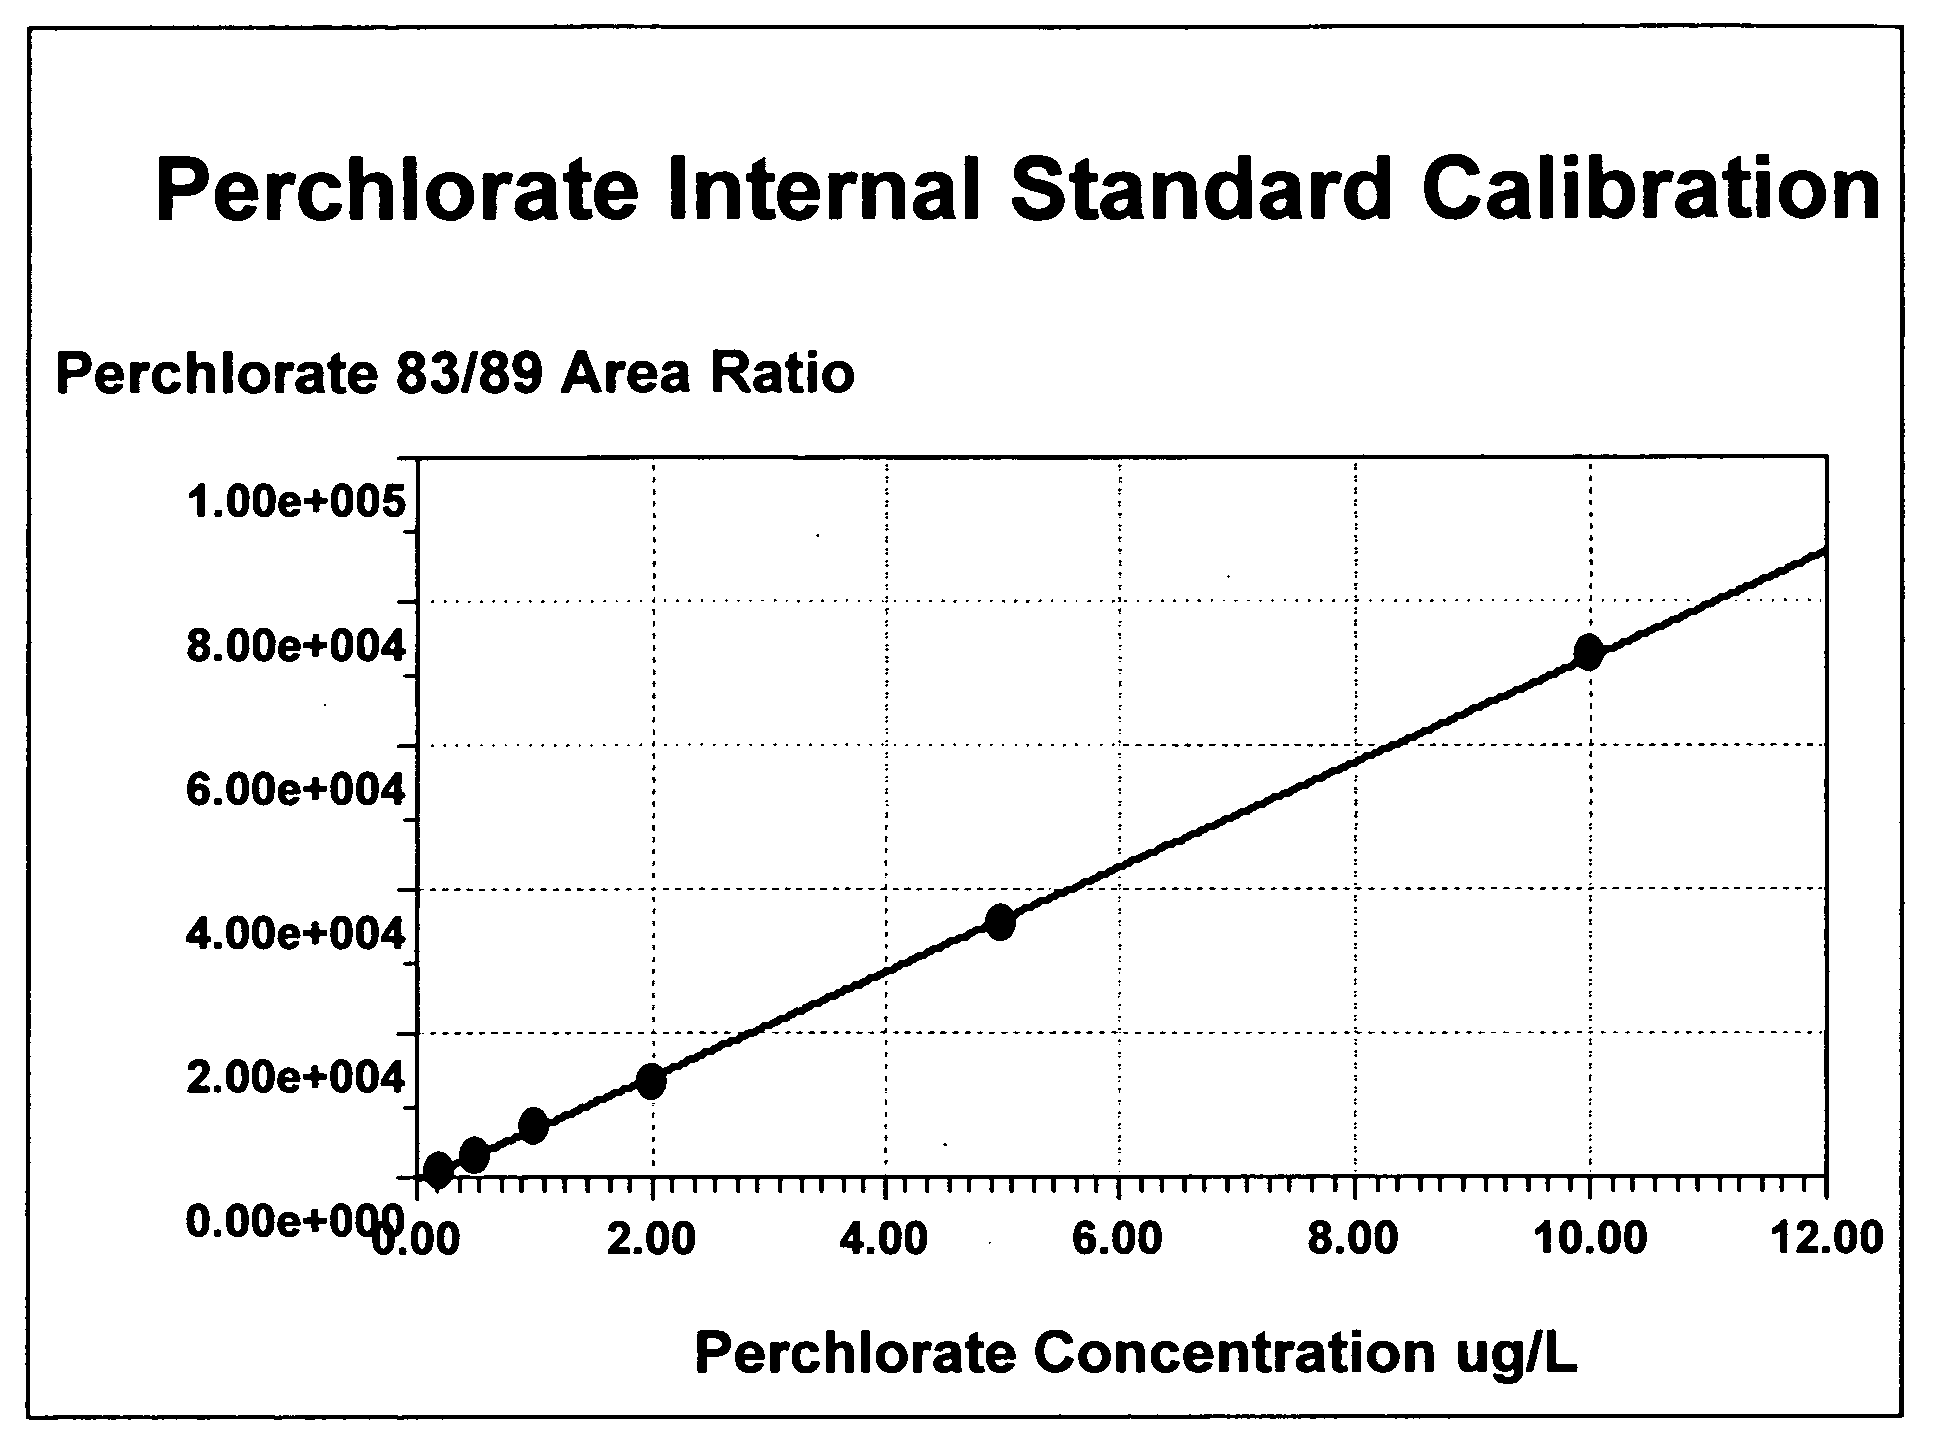 Method for analysis of perchlorate